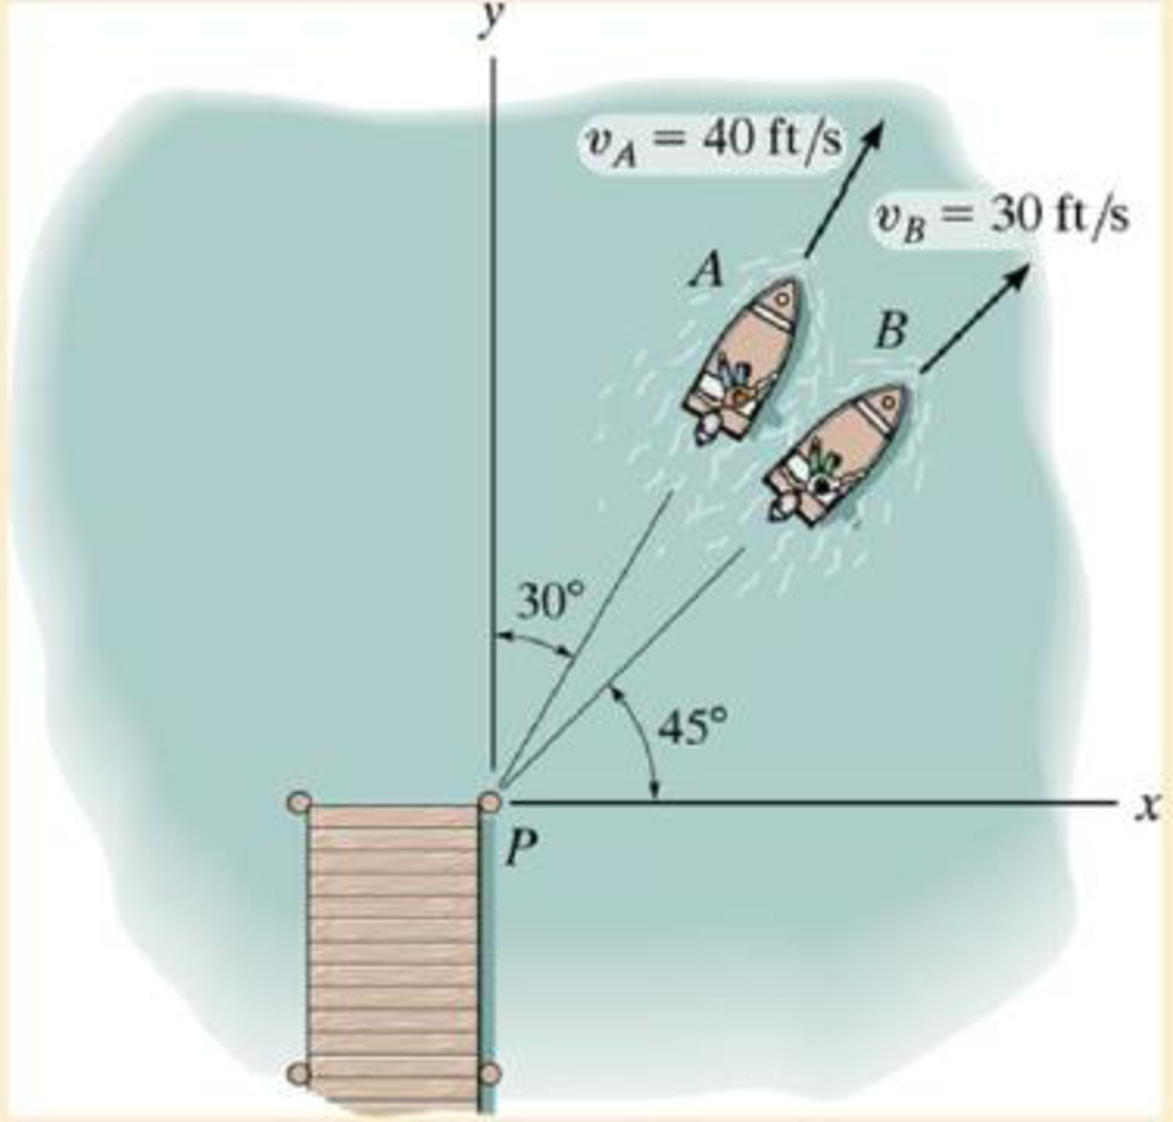 Chapter 12.10, Problem 221P, If vA = 40ft/s and vB = 30 ft/s. determine the velocity of boat A relative to boat B. How long after 